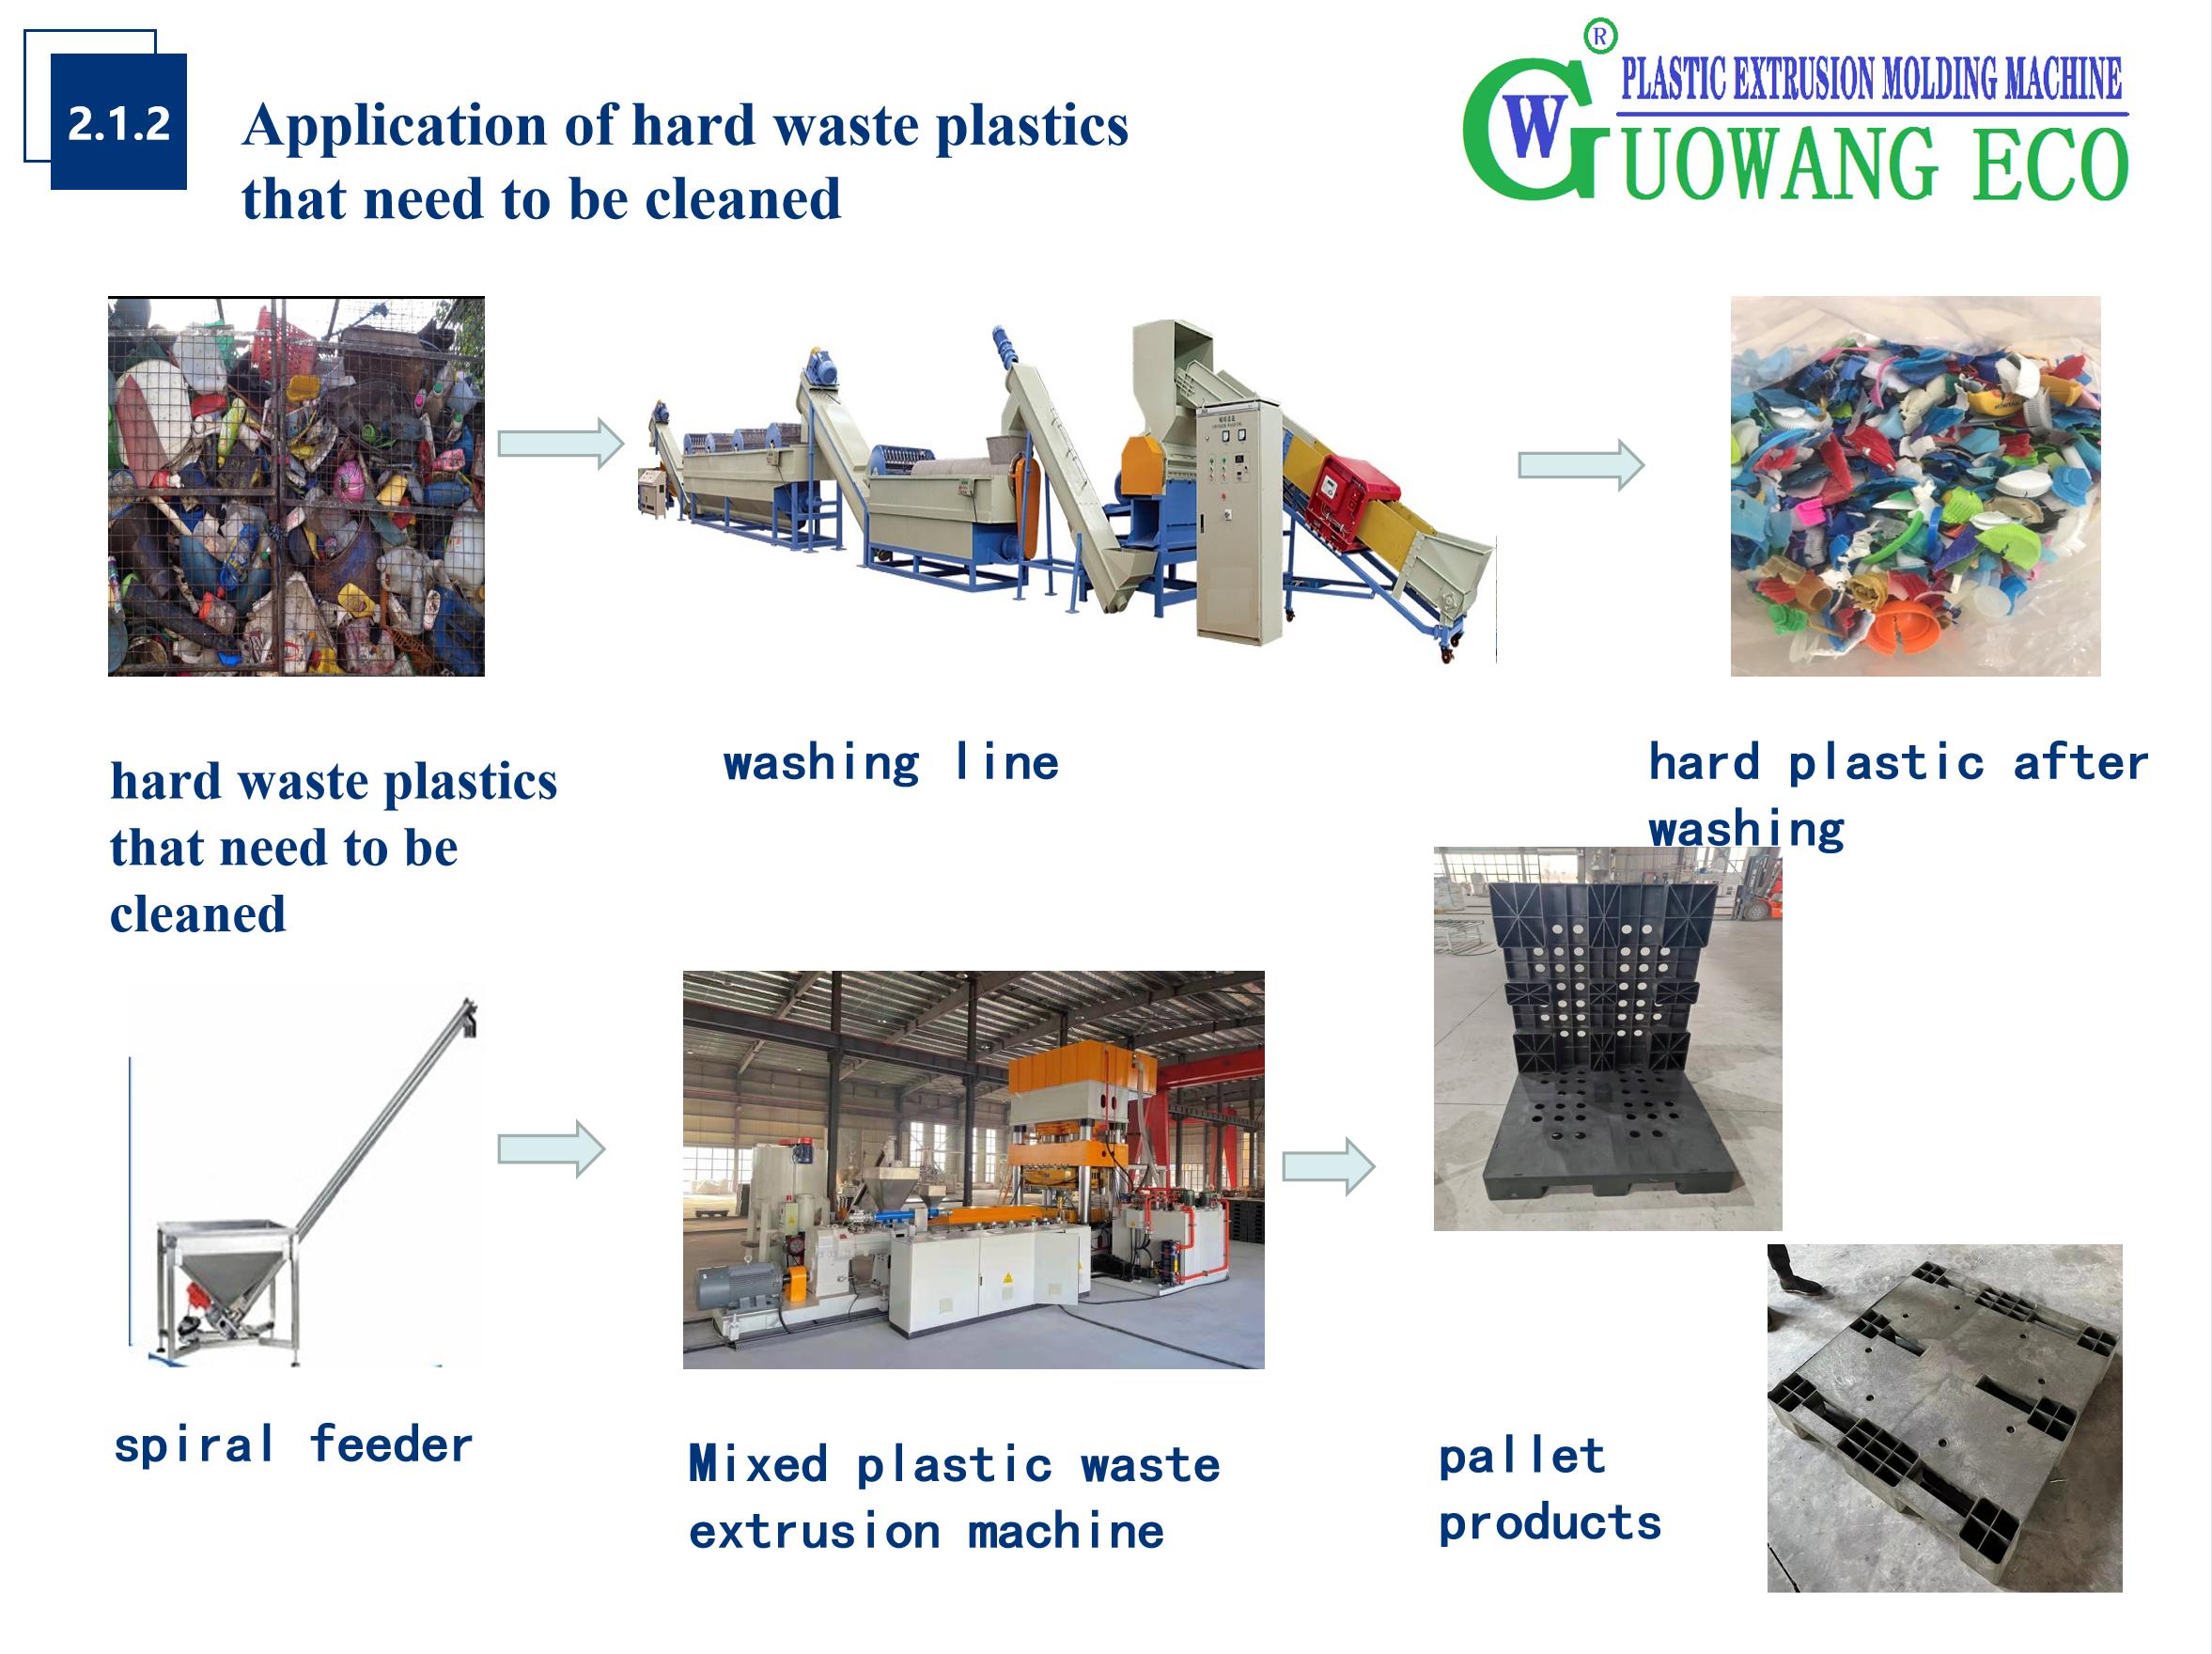 Application_of_hard_waste_plastics_that_need_to_be_cleaned.jpg